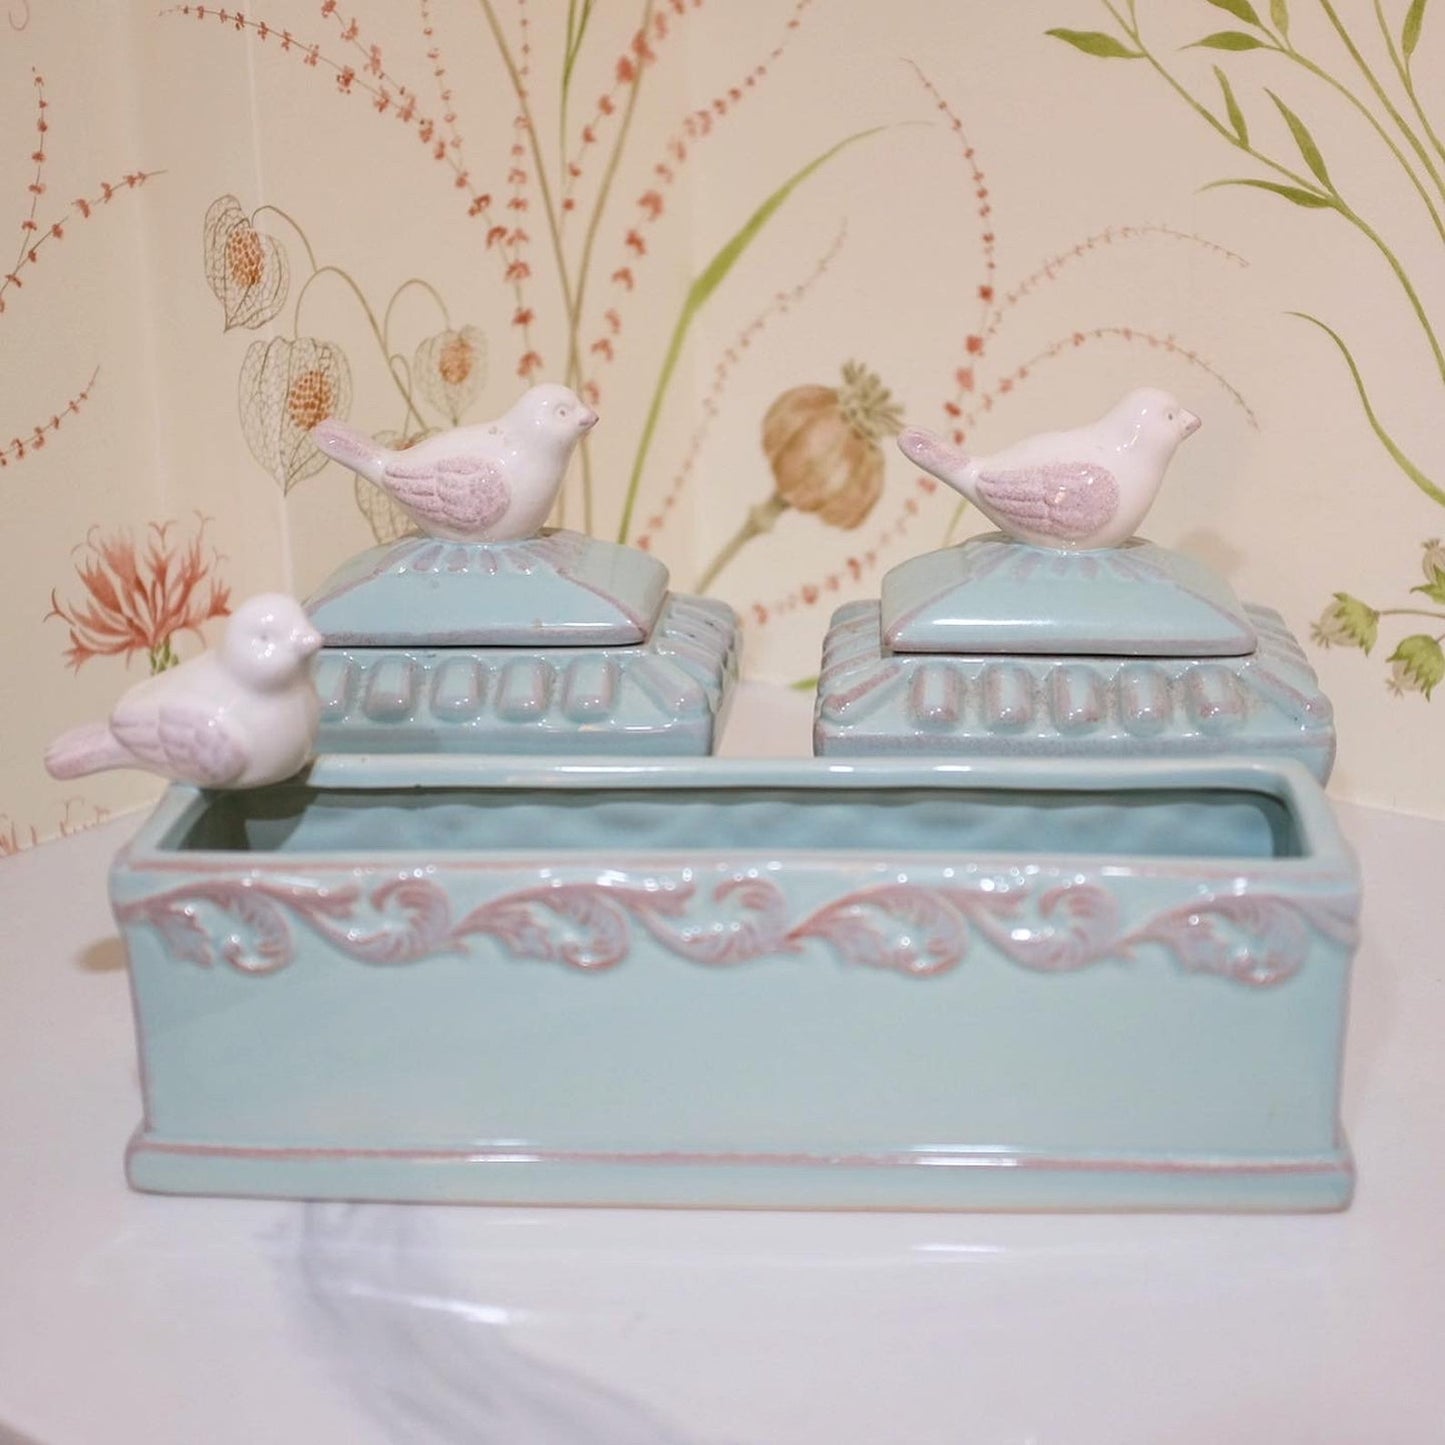 Set of Three Pale Blue Tricket Dishes with White Bird Details